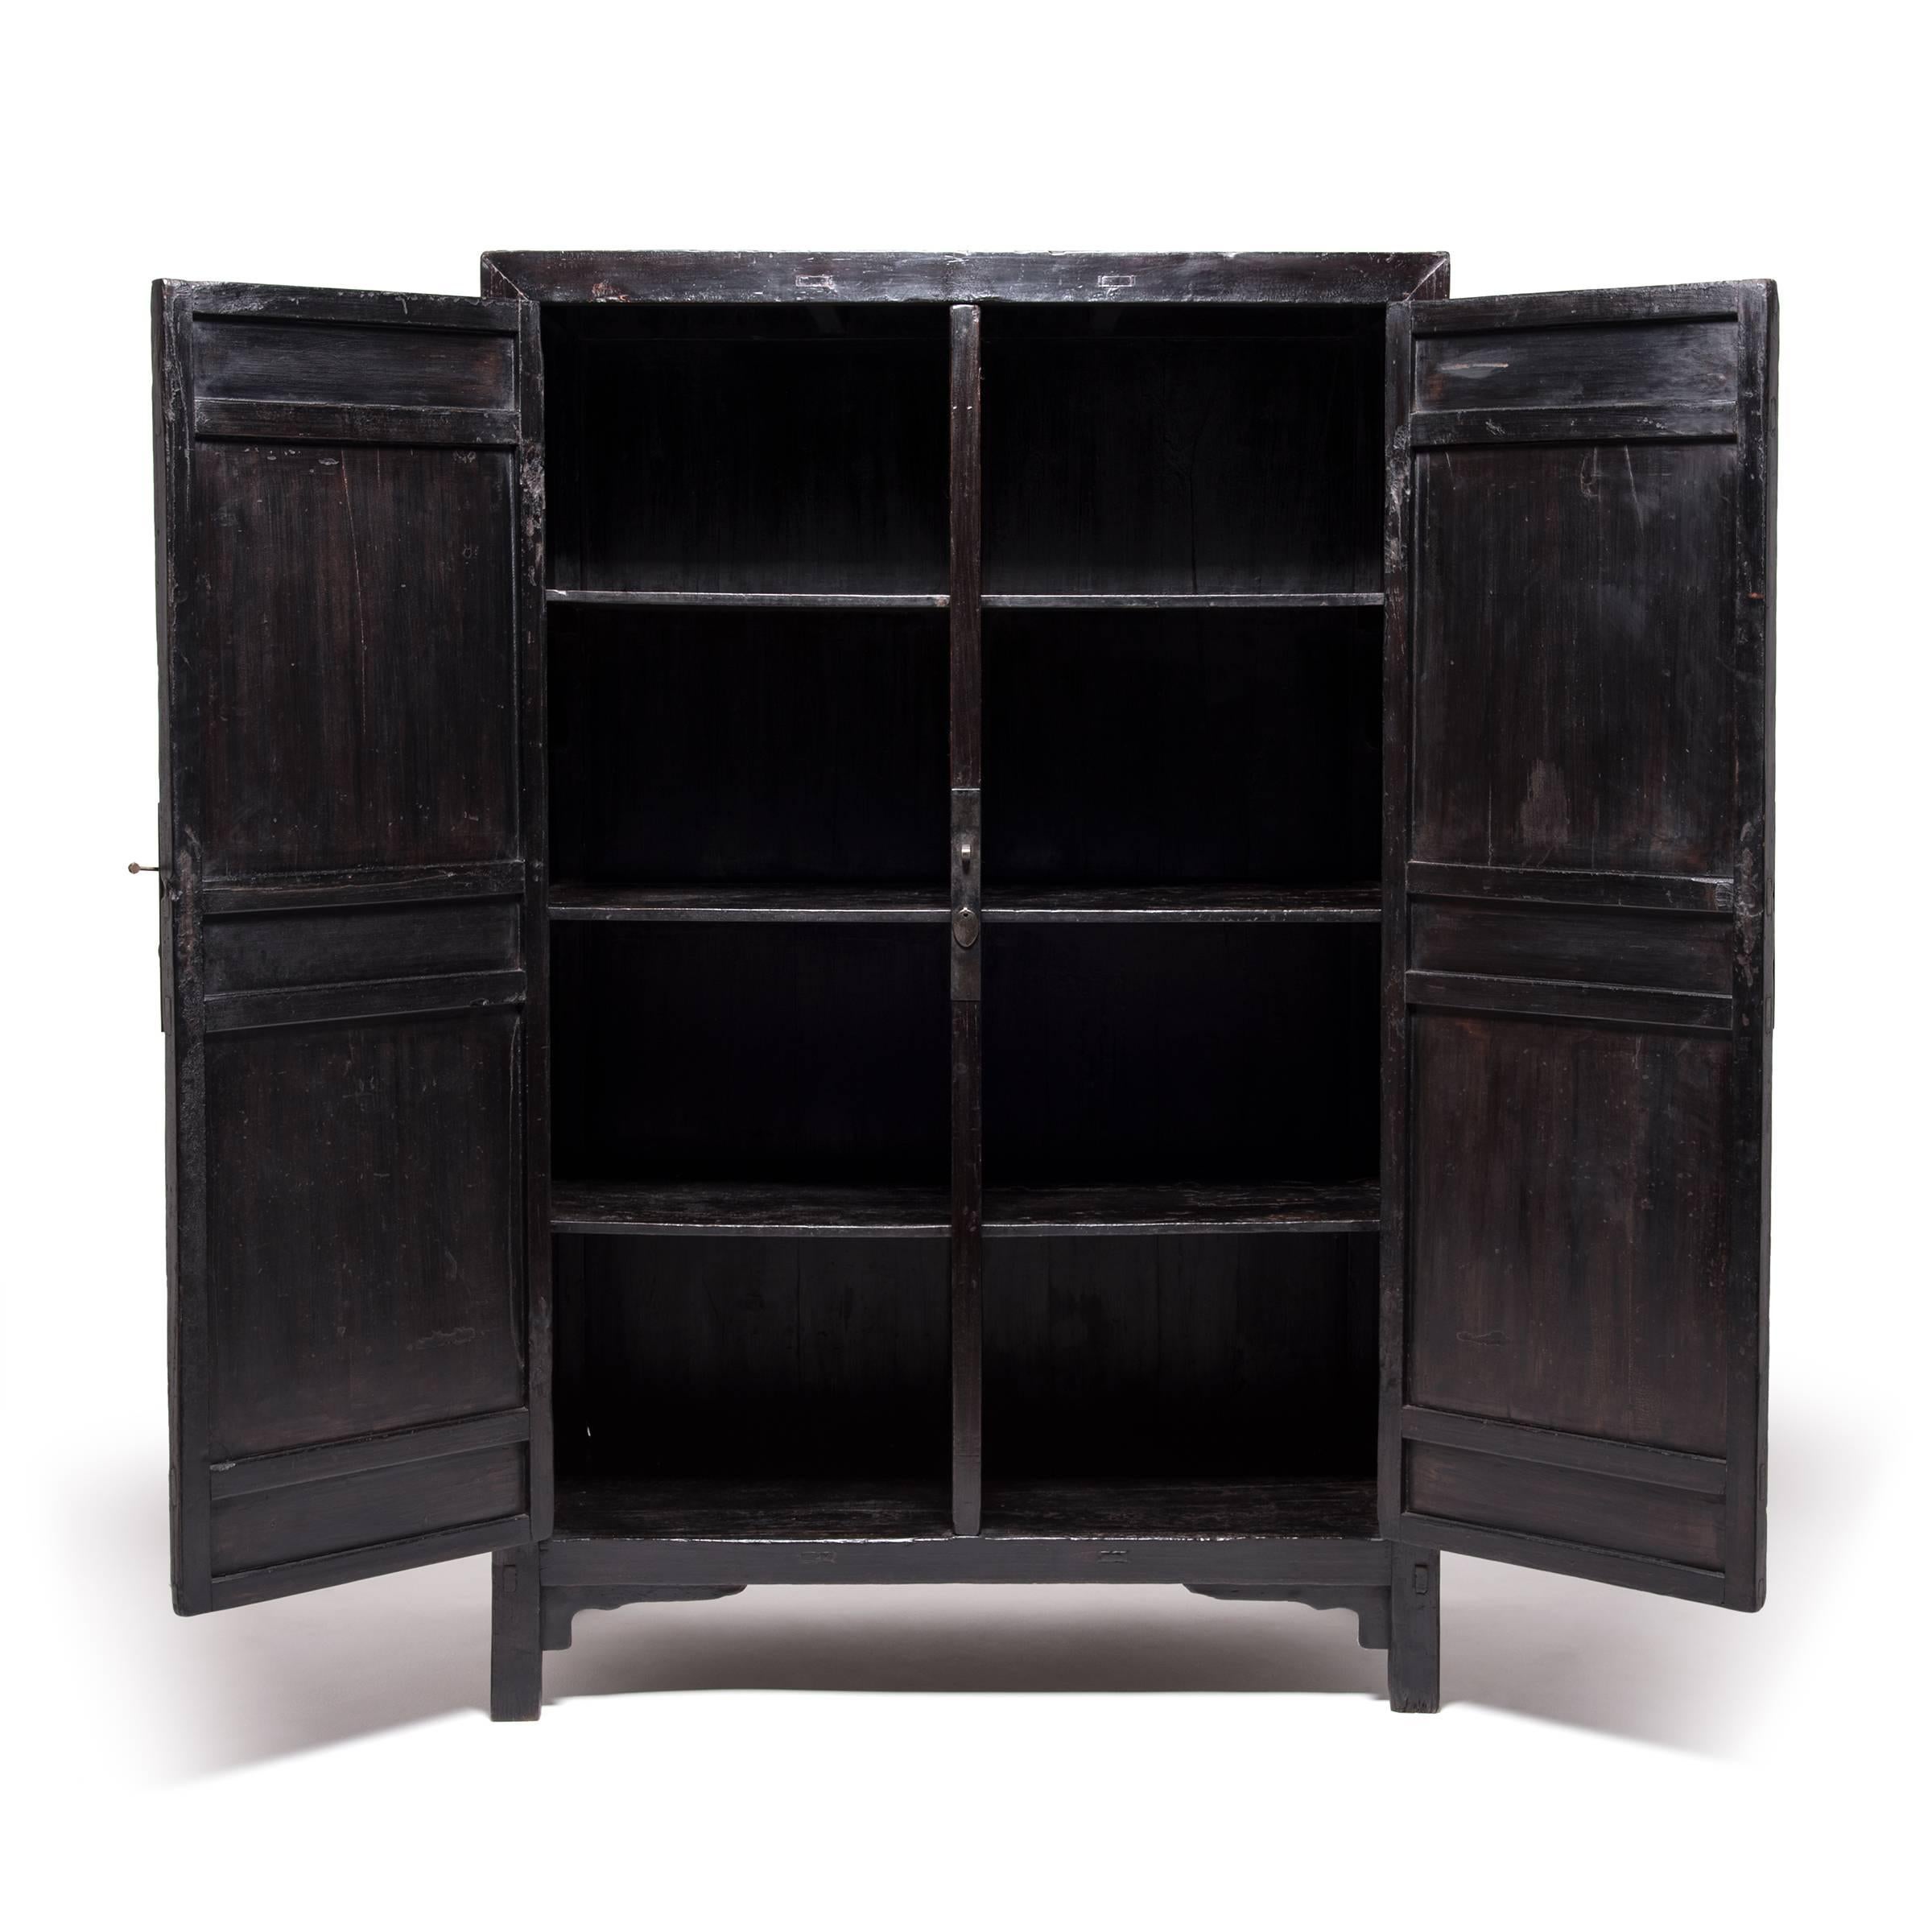 The imposing doors of this 19th century cabinet are accented with a trio of lozenge-shaped moldings that enliven the tall, rectilinear silhouette with horizontal lines. Invigorating the cabinet with a sense of rhythm and geometric tension, this